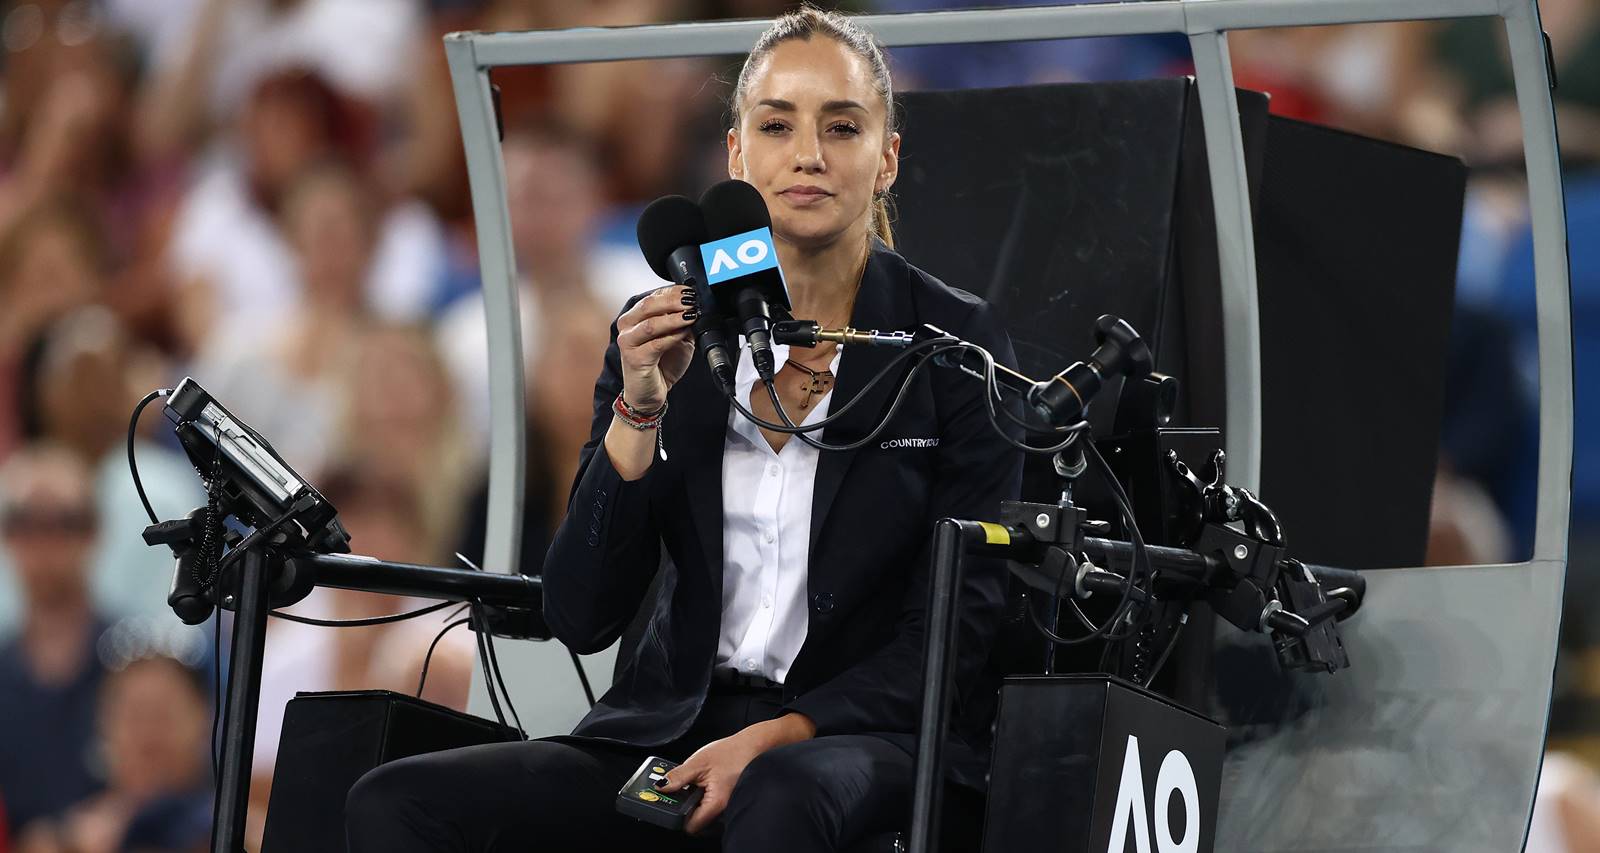 Marijana Veljovic Wiki, Age, and Facts About the Chair Umpire Officiating Australian Open